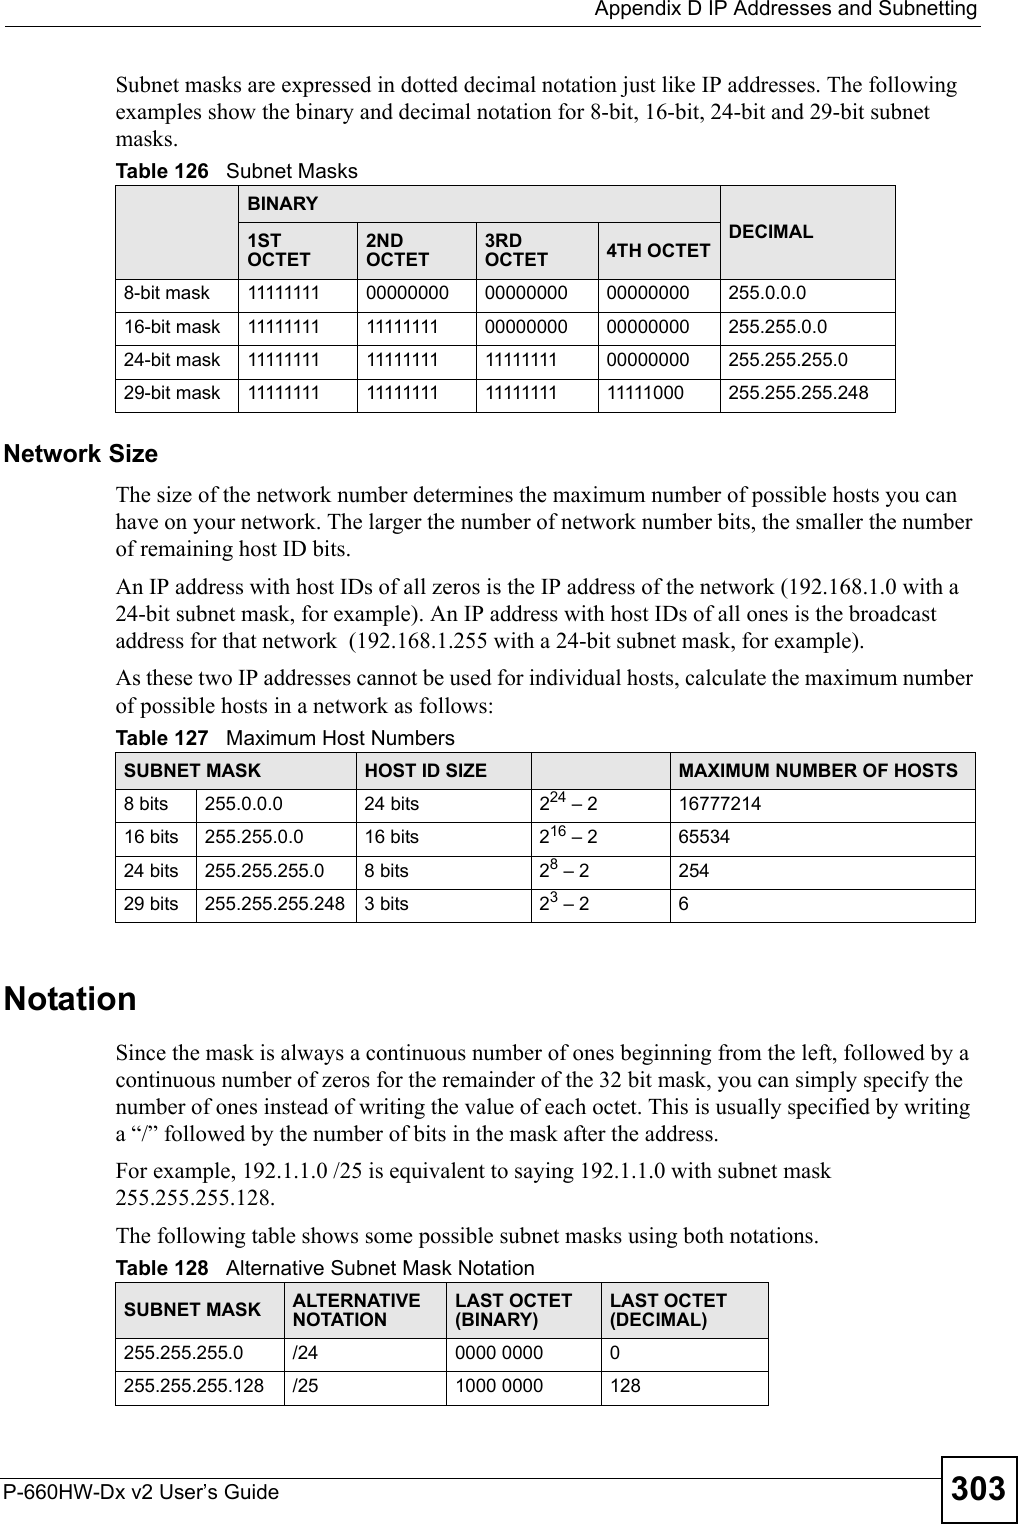  Appendix D IP Addresses and SubnettingP-660HW-Dx v2 User’s Guide 303Subnet masks are expressed in dotted decimal notation just like IP addresses. The following examples show the binary and decimal notation for 8-bit, 16-bit, 24-bit and 29-bit subnet masks. Network SizeThe size of the network number determines the maximum number of possible hosts you can have on your network. The larger the number of network number bits, the smaller the number of remaining host ID bits. An IP address with host IDs of all zeros is the IP address of the network (192.168.1.0 with a 24-bit subnet mask, for example). An IP address with host IDs of all ones is the broadcast address for that network  (192.168.1.255 with a 24-bit subnet mask, for example).As these two IP addresses cannot be used for individual hosts, calculate the maximum number of possible hosts in a network as follows:NotationSince the mask is always a continuous number of ones beginning from the left, followed by a continuous number of zeros for the remainder of the 32 bit mask, you can simply specify the number of ones instead of writing the value of each octet. This is usually specified by writing a “/” followed by the number of bits in the mask after the address. For example, 192.1.1.0 /25 is equivalent to saying 192.1.1.0 with subnet mask 255.255.255.128. The following table shows some possible subnet masks using both notations. Table 126   Subnet MasksBINARYDECIMAL1ST OCTET2ND OCTET3RD OCTET 4TH OCTET8-bit mask 11111111 00000000 00000000 00000000 255.0.0.016-bit mask 11111111 11111111 00000000 00000000 255.255.0.024-bit mask 11111111 11111111 11111111 00000000 255.255.255.029-bit mask 11111111 11111111 11111111 11111000 255.255.255.248Table 127   Maximum Host NumbersSUBNET MASK HOST ID SIZE MAXIMUM NUMBER OF HOSTS8 bits 255.0.0.0 24 bits 224 – 2 1677721416 bits 255.255.0.0 16 bits 216 – 2 6553424 bits 255.255.255.0 8 bits 28 – 2 25429 bits 255.255.255.248 3 bits 23 – 2 6Table 128   Alternative Subnet Mask NotationSUBNET MASK ALTERNATIVE NOTATIONLAST OCTET (BINARY)LAST OCTET (DECIMAL)255.255.255.0 /24 0000 0000 0255.255.255.128 /25 1000 0000 128